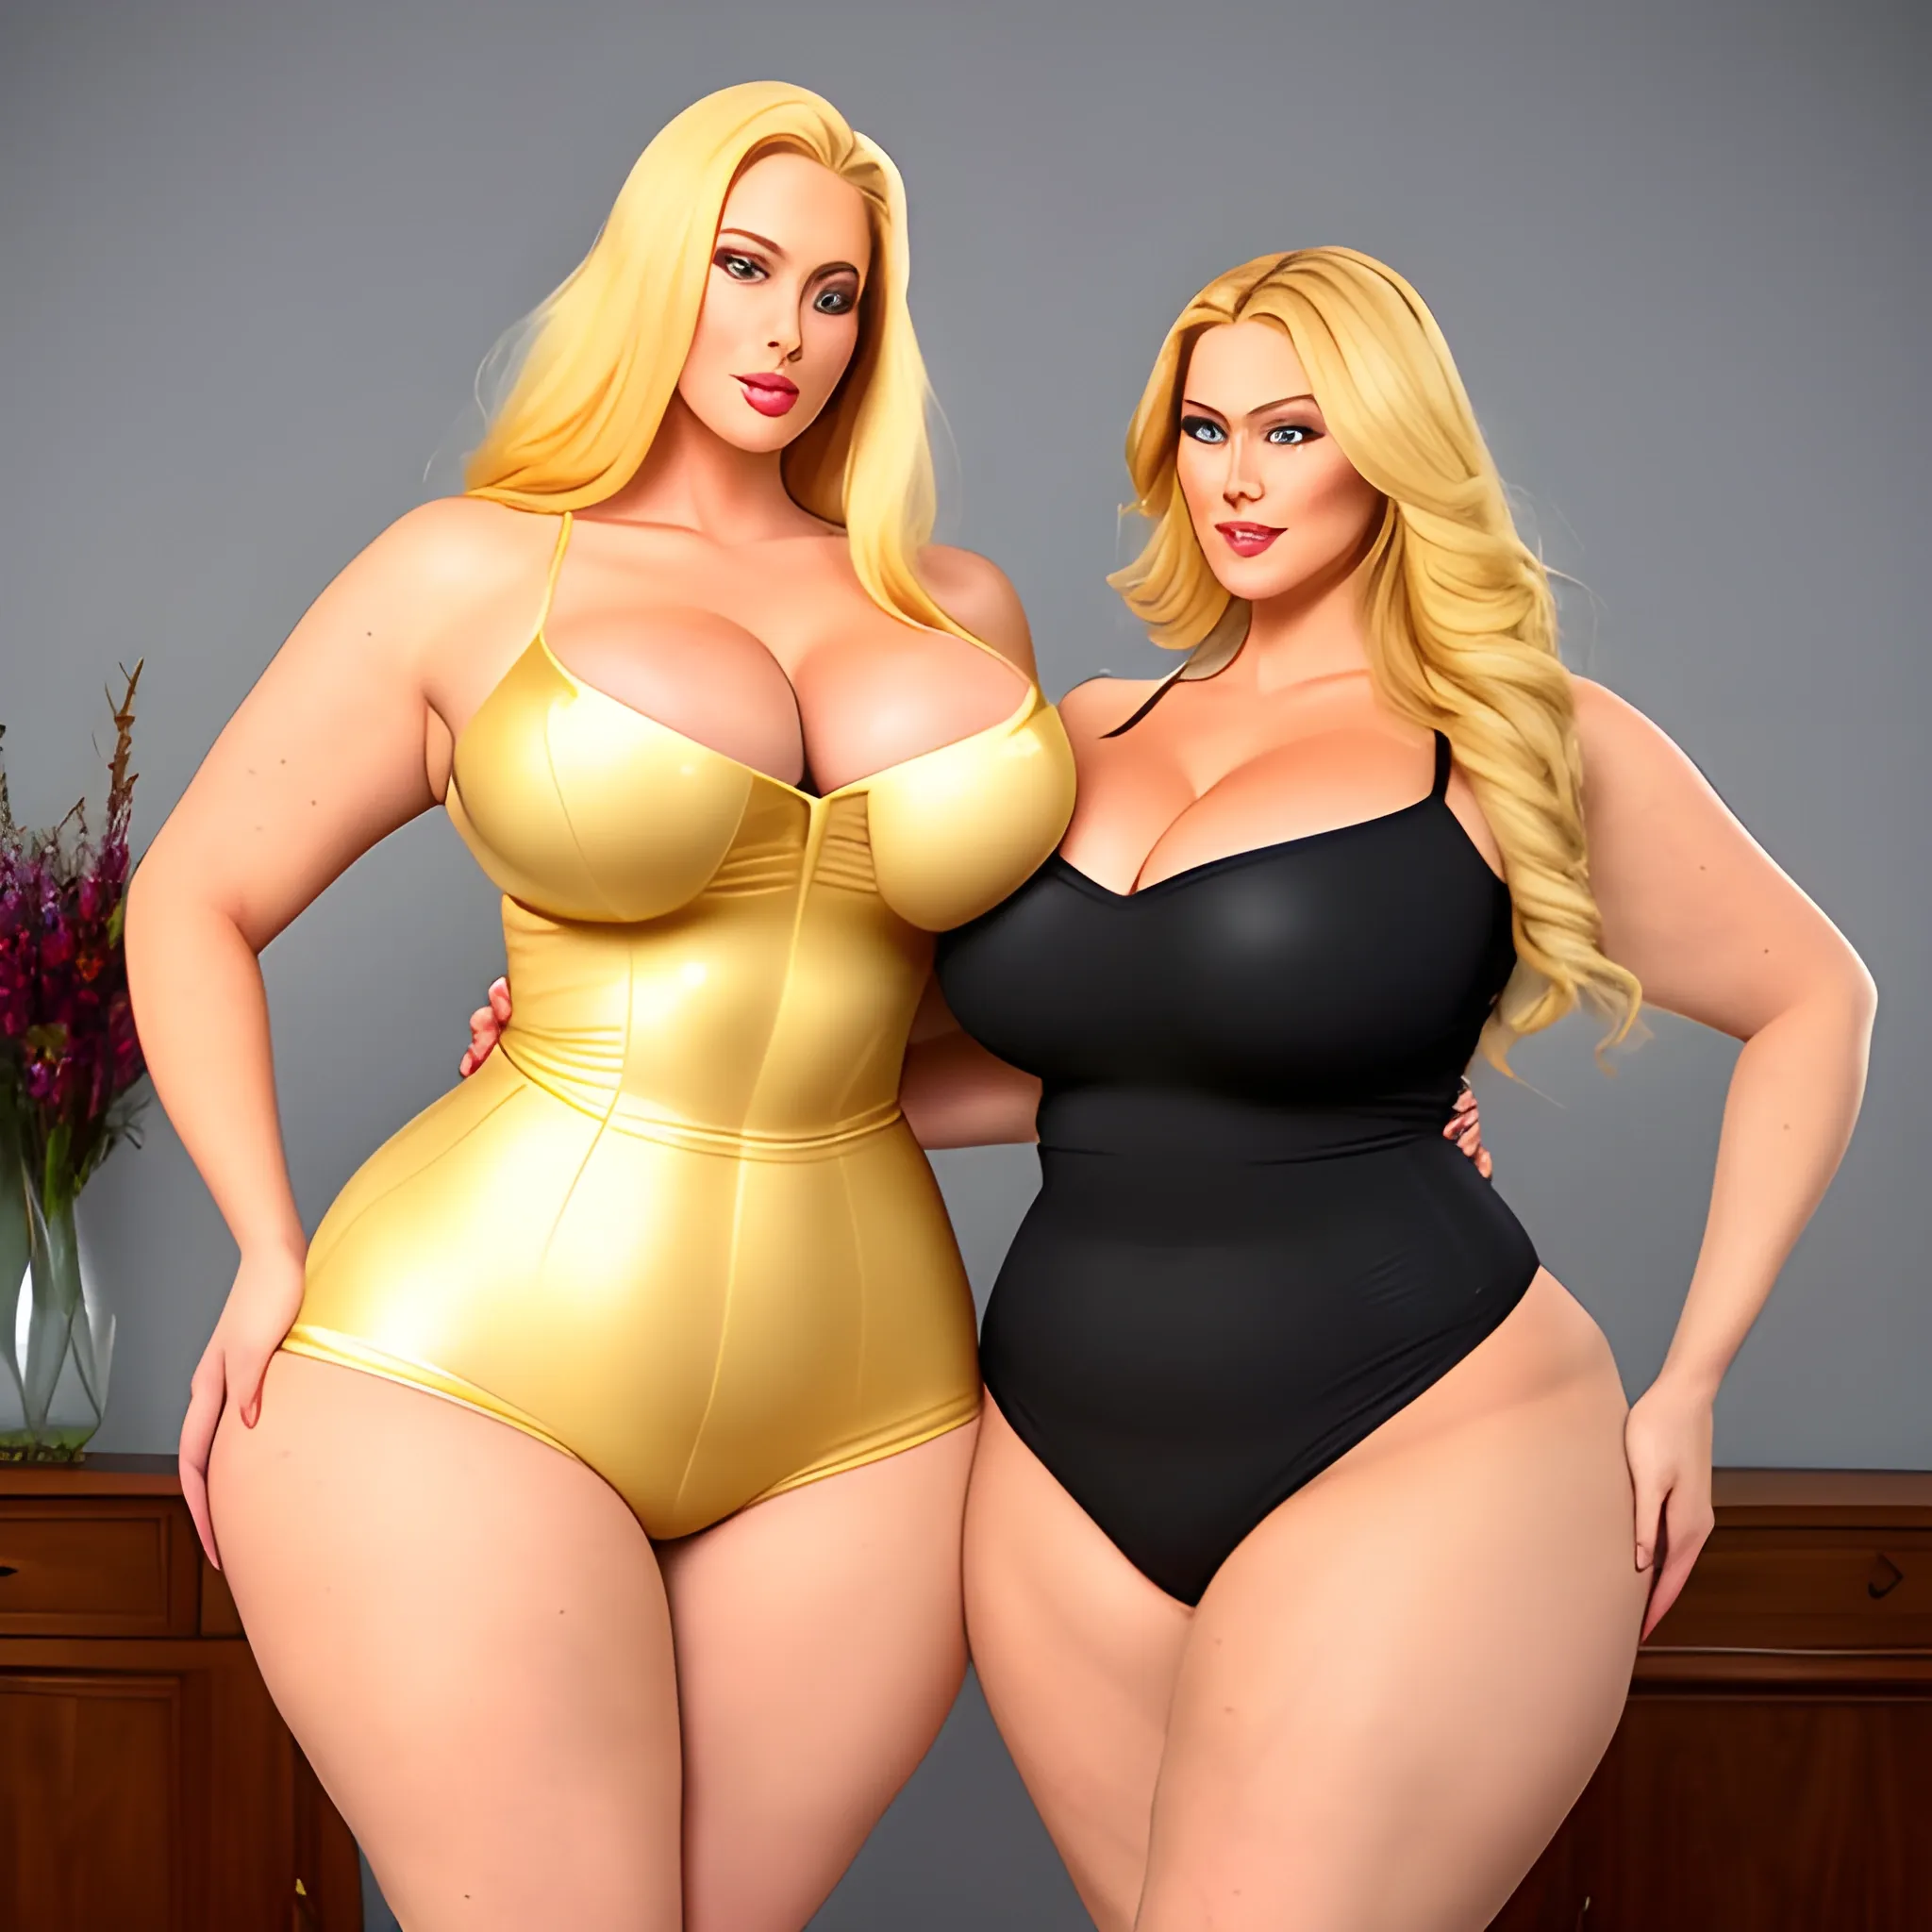 huge and very tall, beautiful, plus size, friendly beautiful blonde girl broad shoulders, slightly muscular,  golden blonde hair, full voluptuous hourglass body and long big thighs and big legs in short tight dress, in beautiful house next to her slightly shorter blonde daughters with similar body type hugging and kissing her 